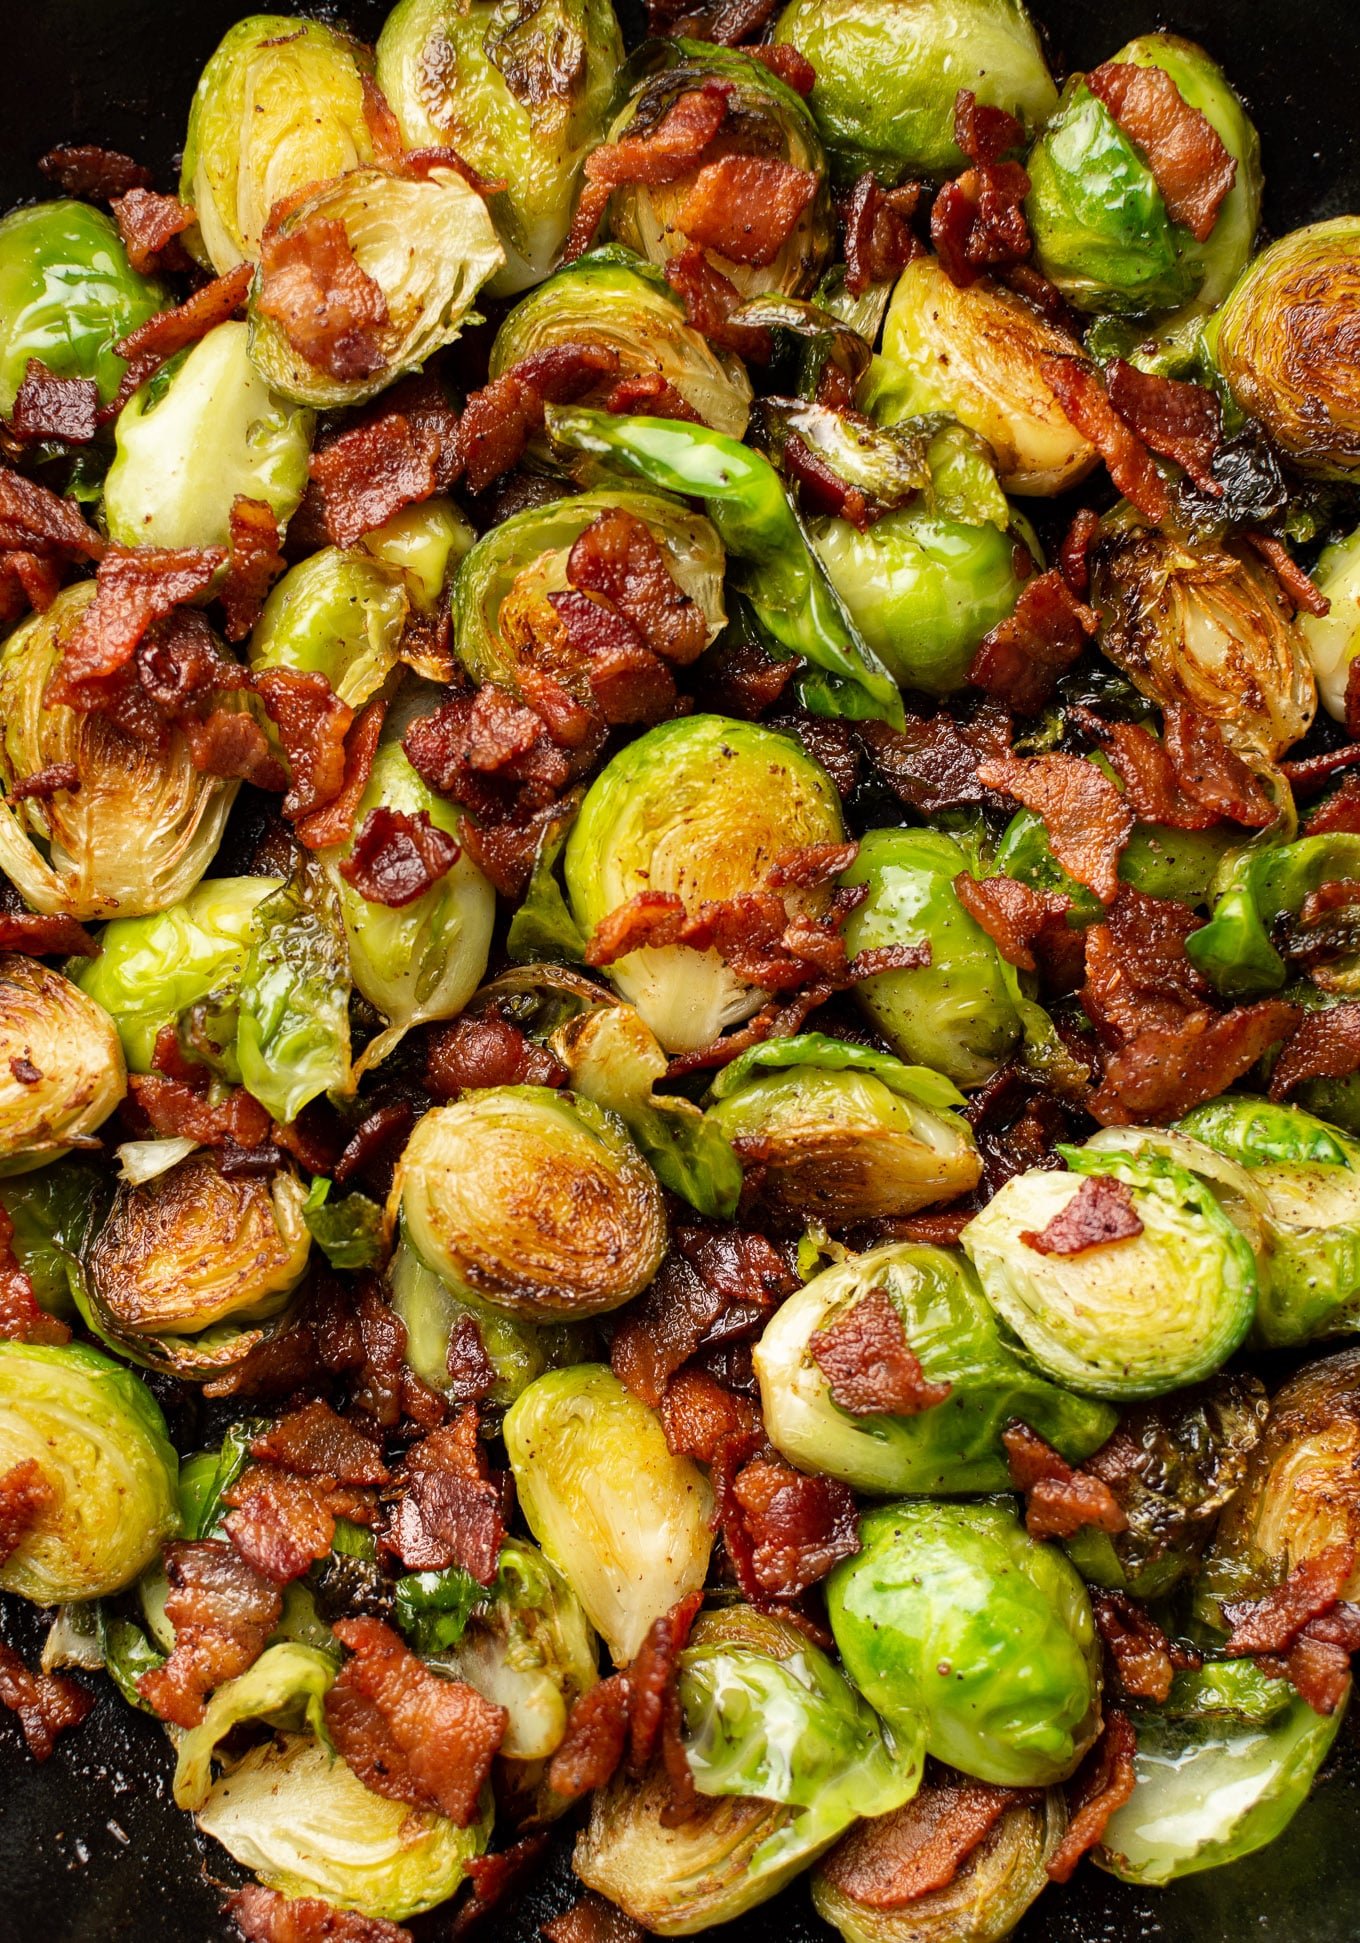 Skillet-Braised Brussels Sprouts Recipe